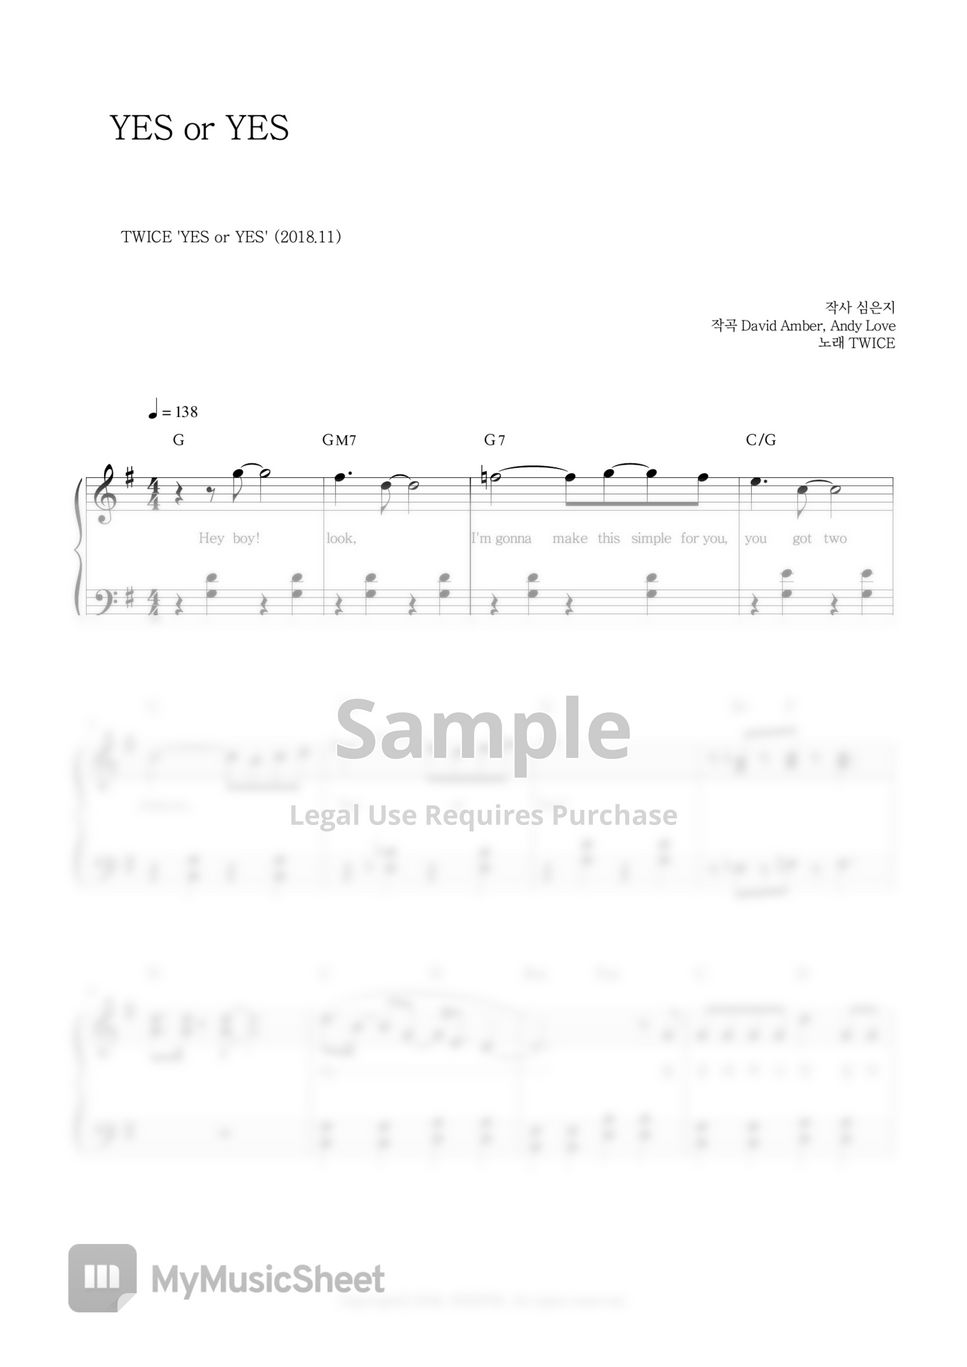 TWICE 'YES or YES' Easy Piano Sheet Music